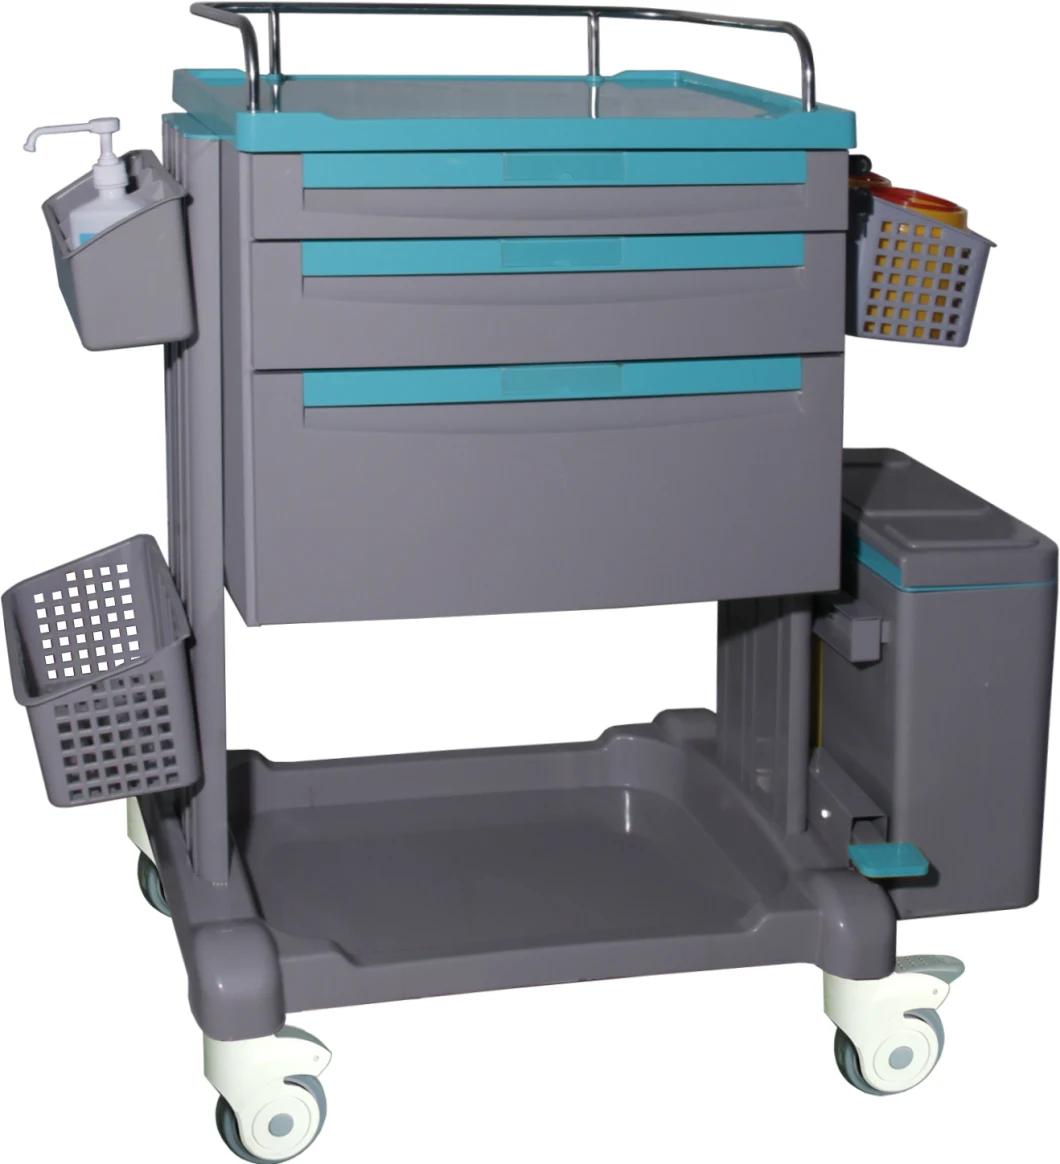 Mn-Ec011 Medical Clinical Nursing Cart Patient Trolley with Swivel Casters